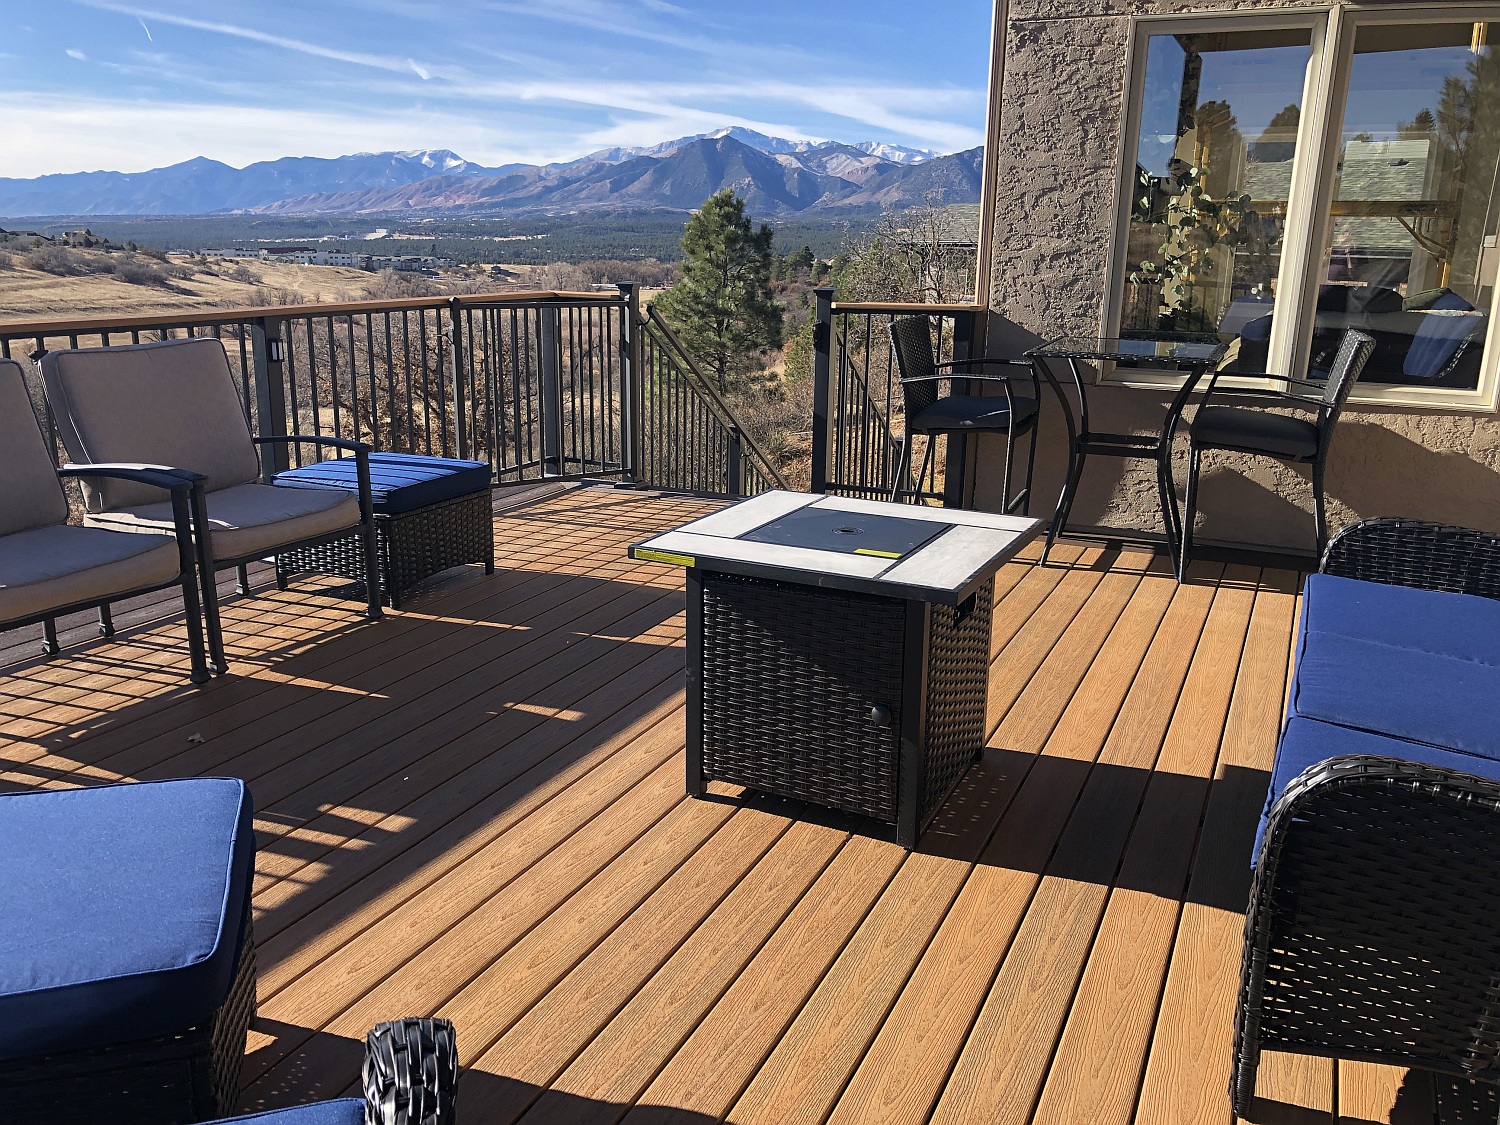 Brand new deck with a view of the mountains and a firepit surrounded by a seating area.